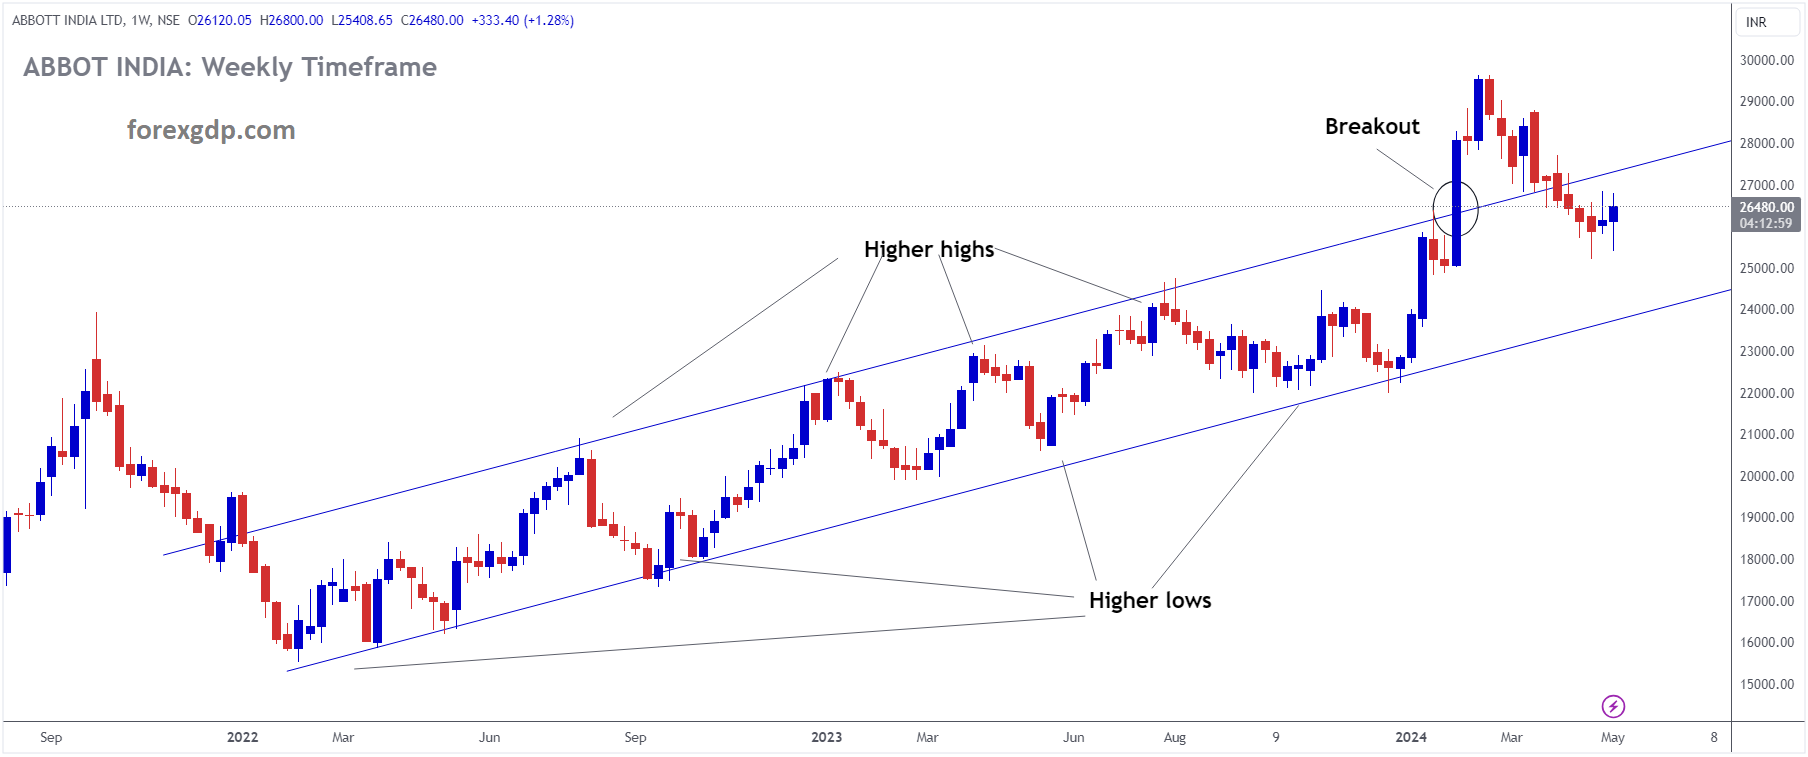 ABBOT INDIA Market price is moving in Ascending channel and market has reached higher high area of the channel